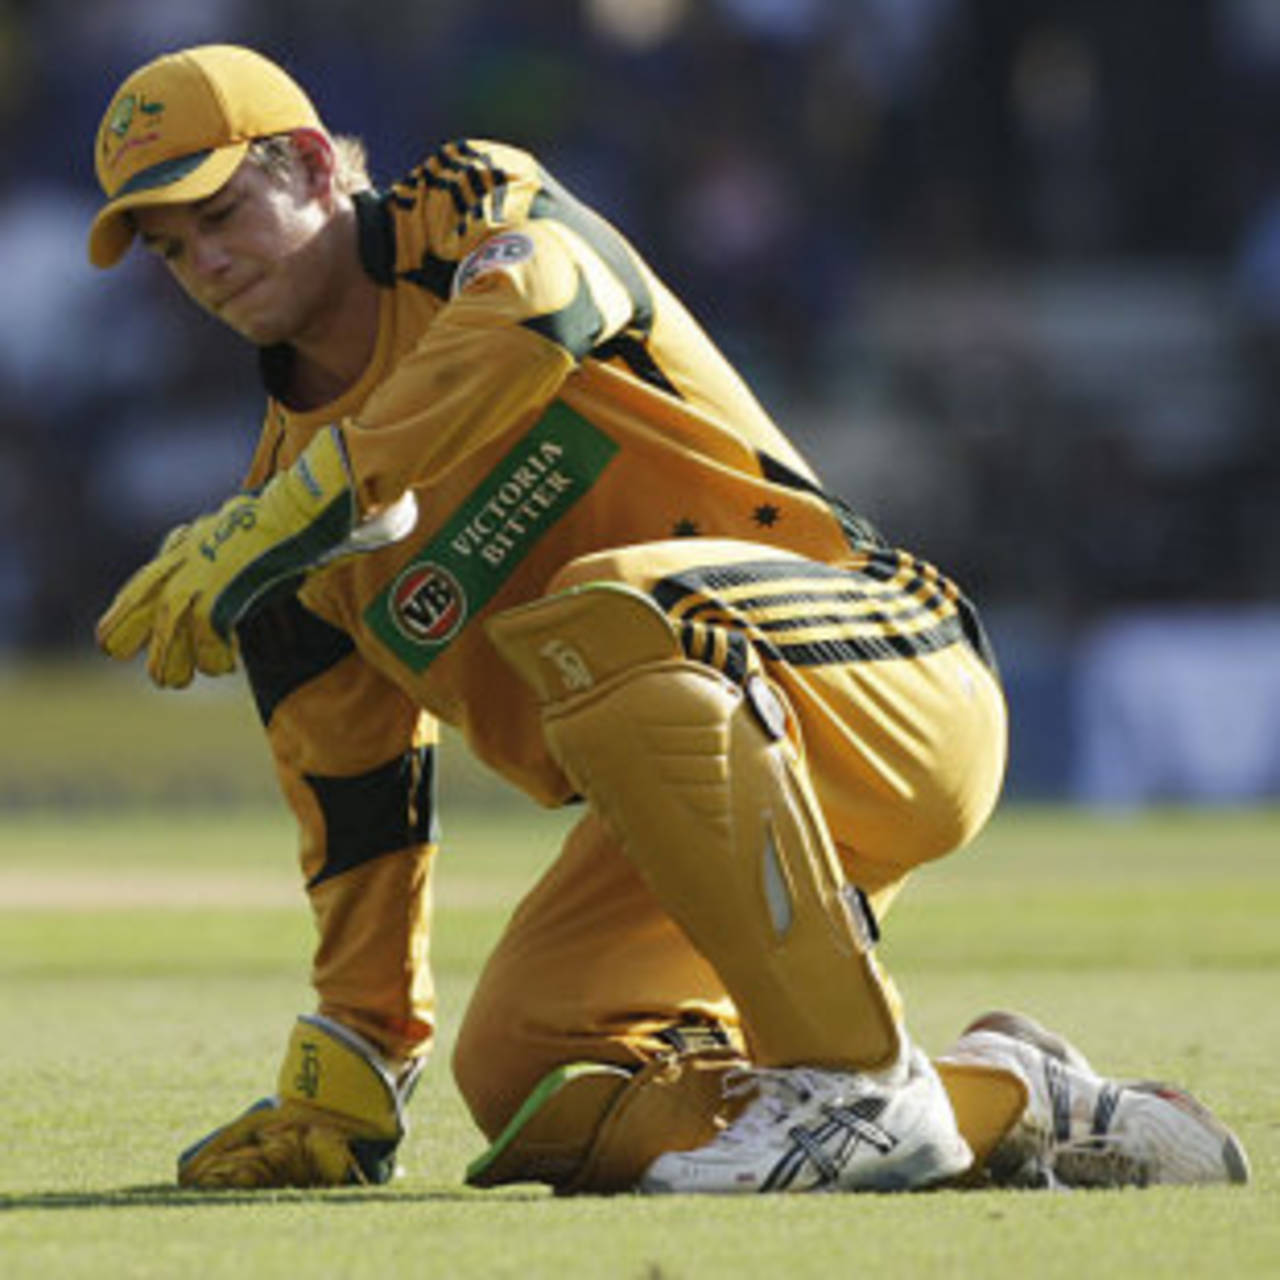 Tim Paine appears to be in discomfort, India v Australia, 2nd ODI, Nagpur, October 28, 2009